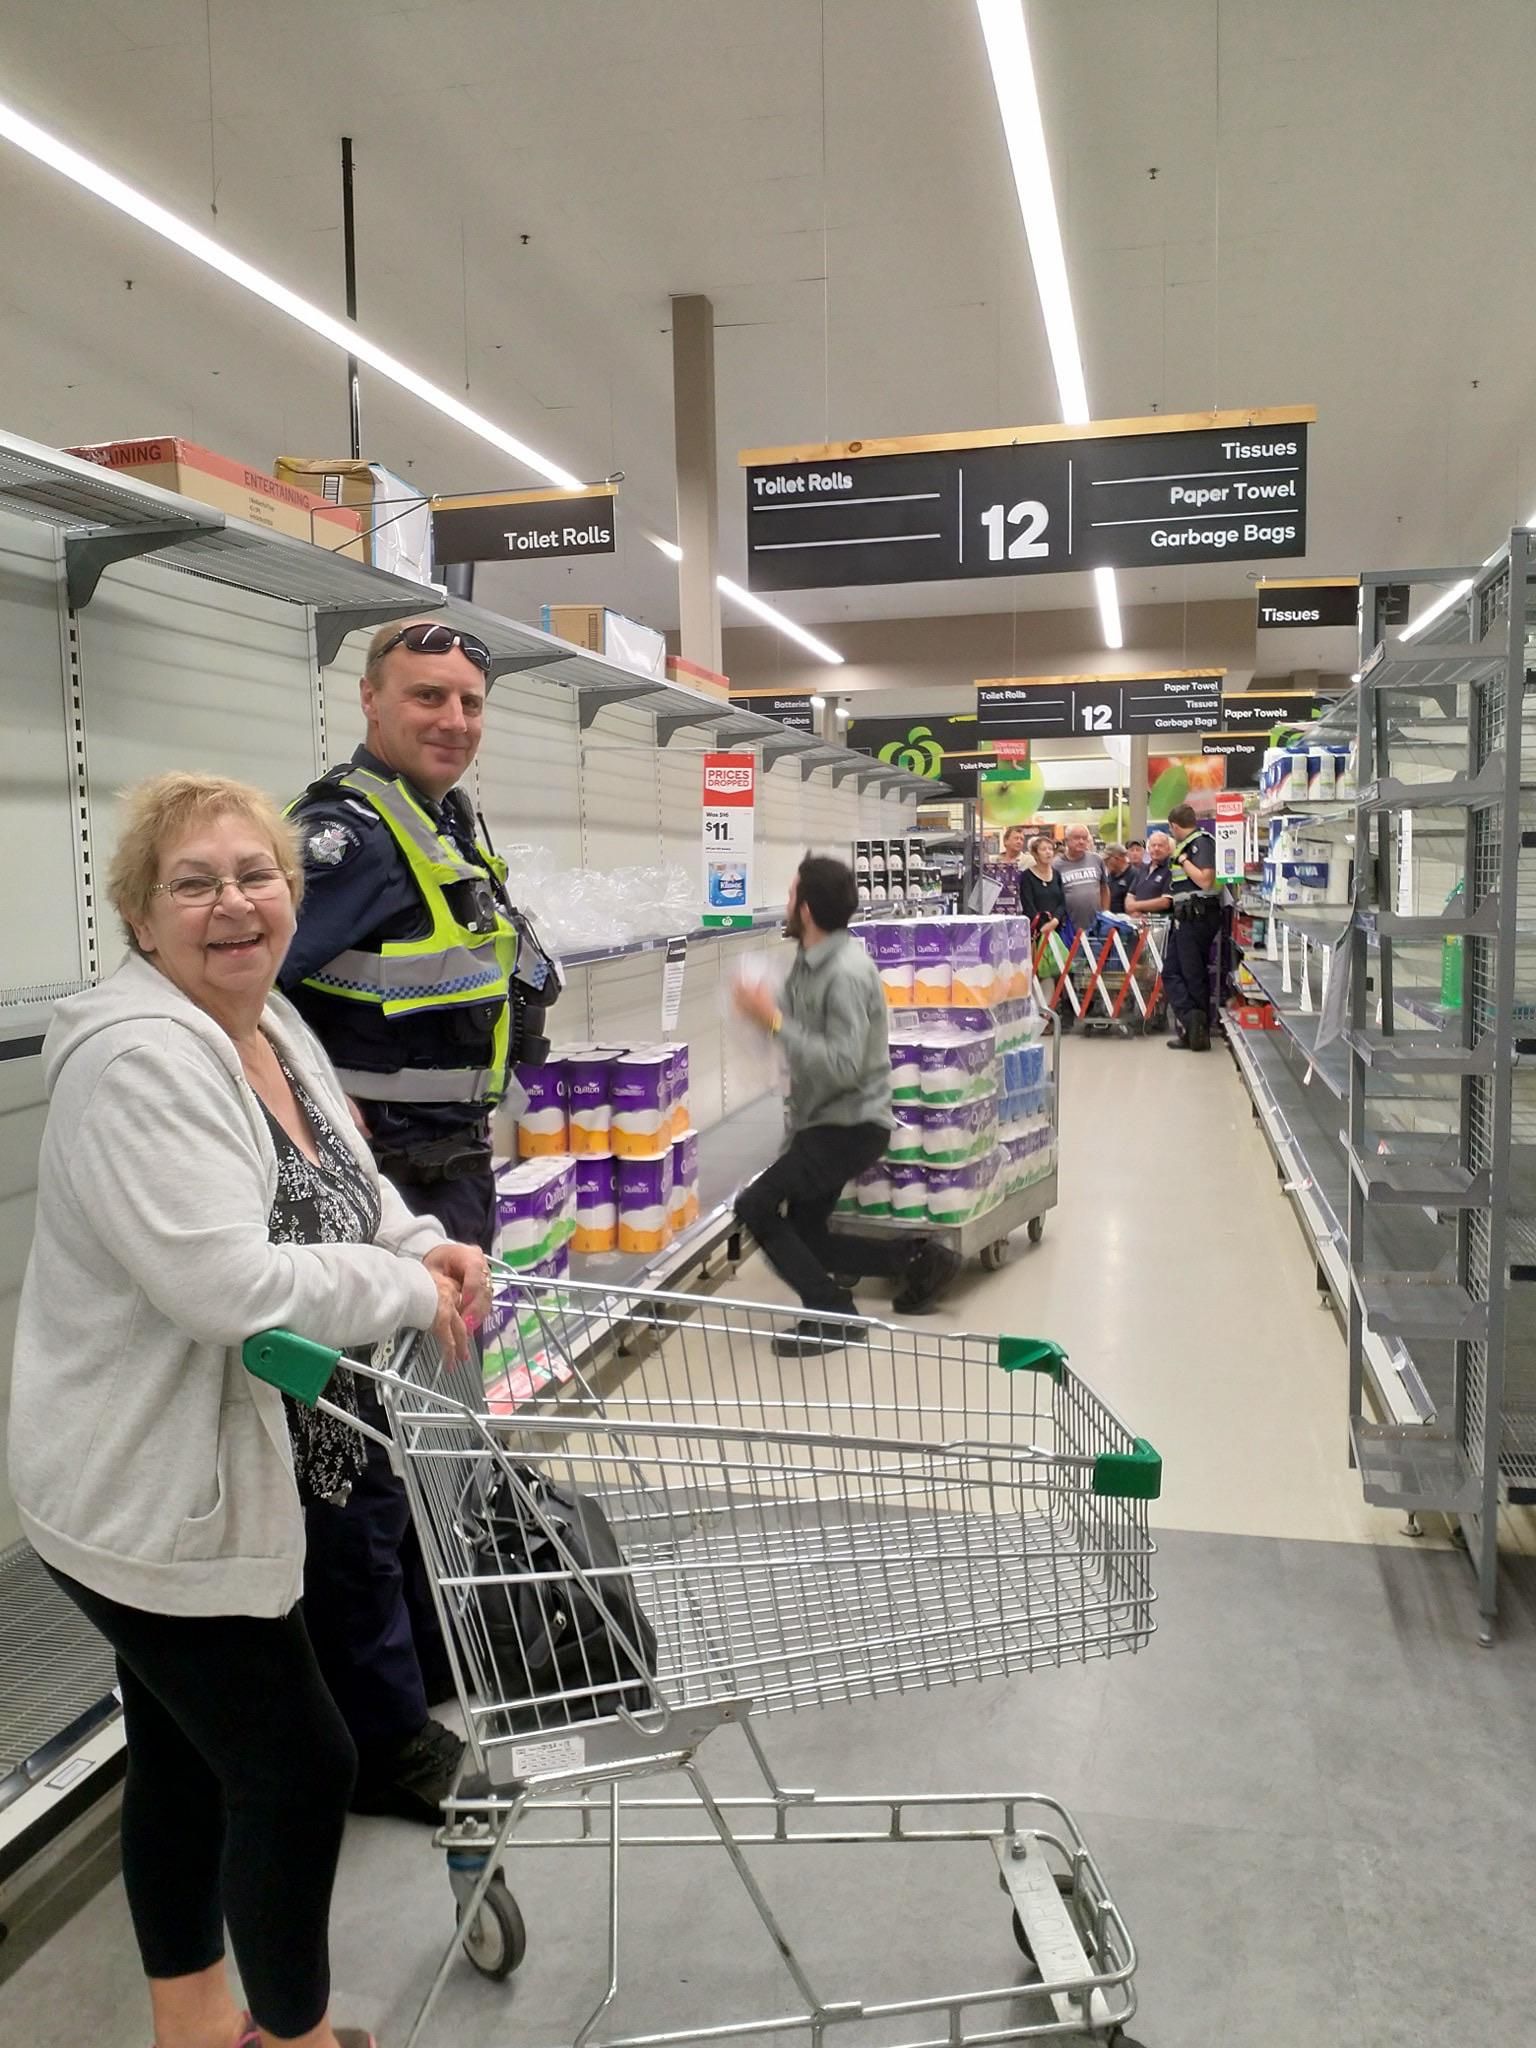 When coronavirus panic is so out of control here in Australia that the cops have to patrol the toilet paper aisle daily to enforce limitations.